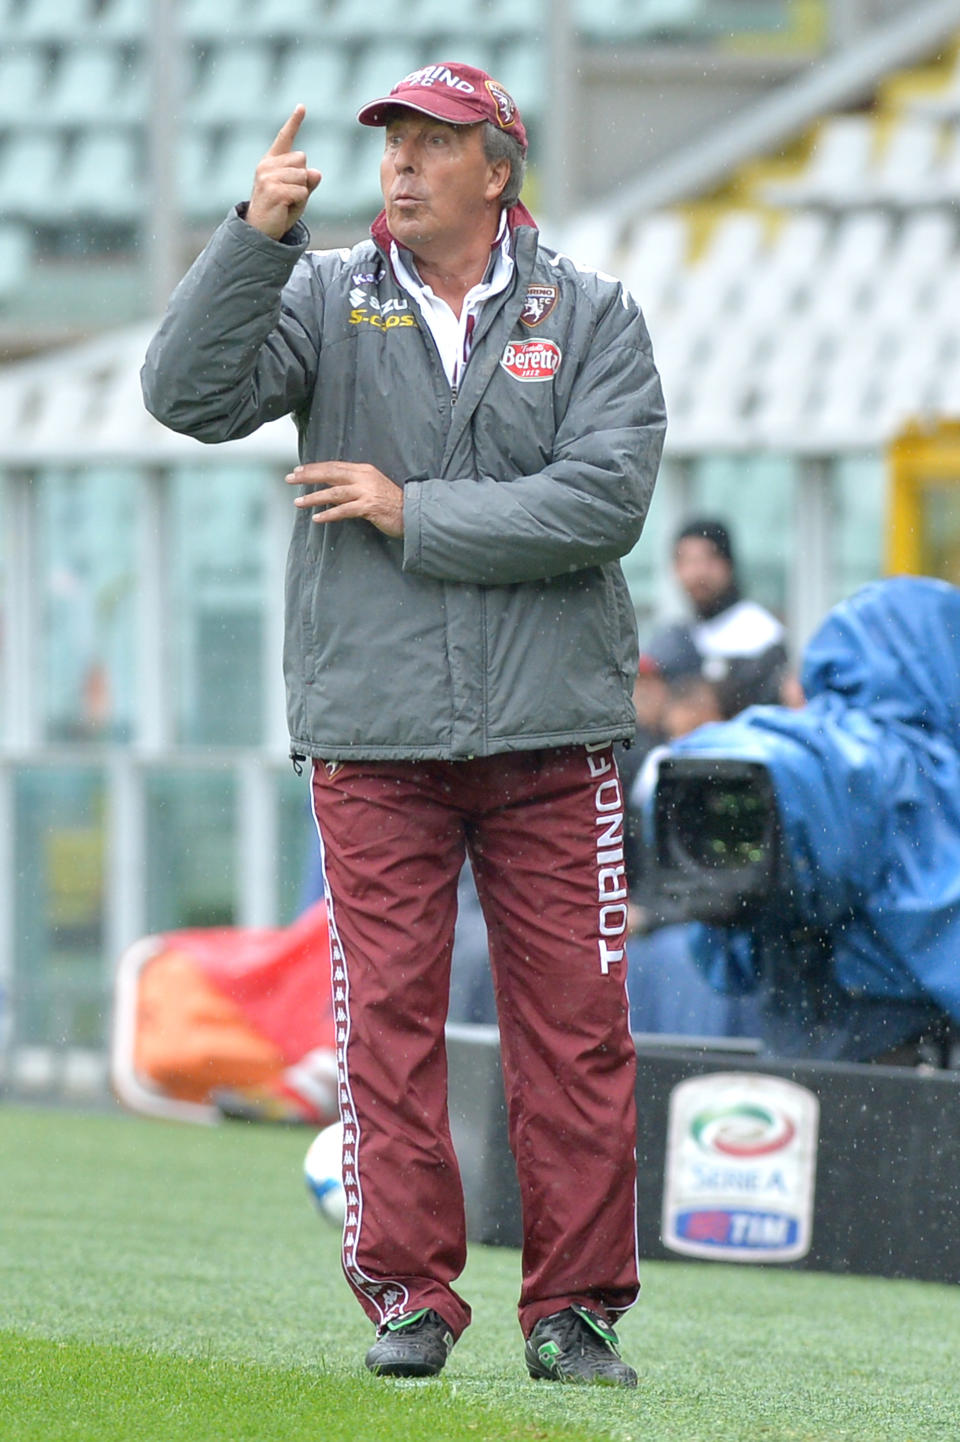 Torino' coach Giampiero Ventura gestures during a Serie A soccer match between Torino and Udinese at the Olympic stadium, in Turin, Italy, Sunday, April 27, 2014. (AP Photo/ Massimo Pinca)